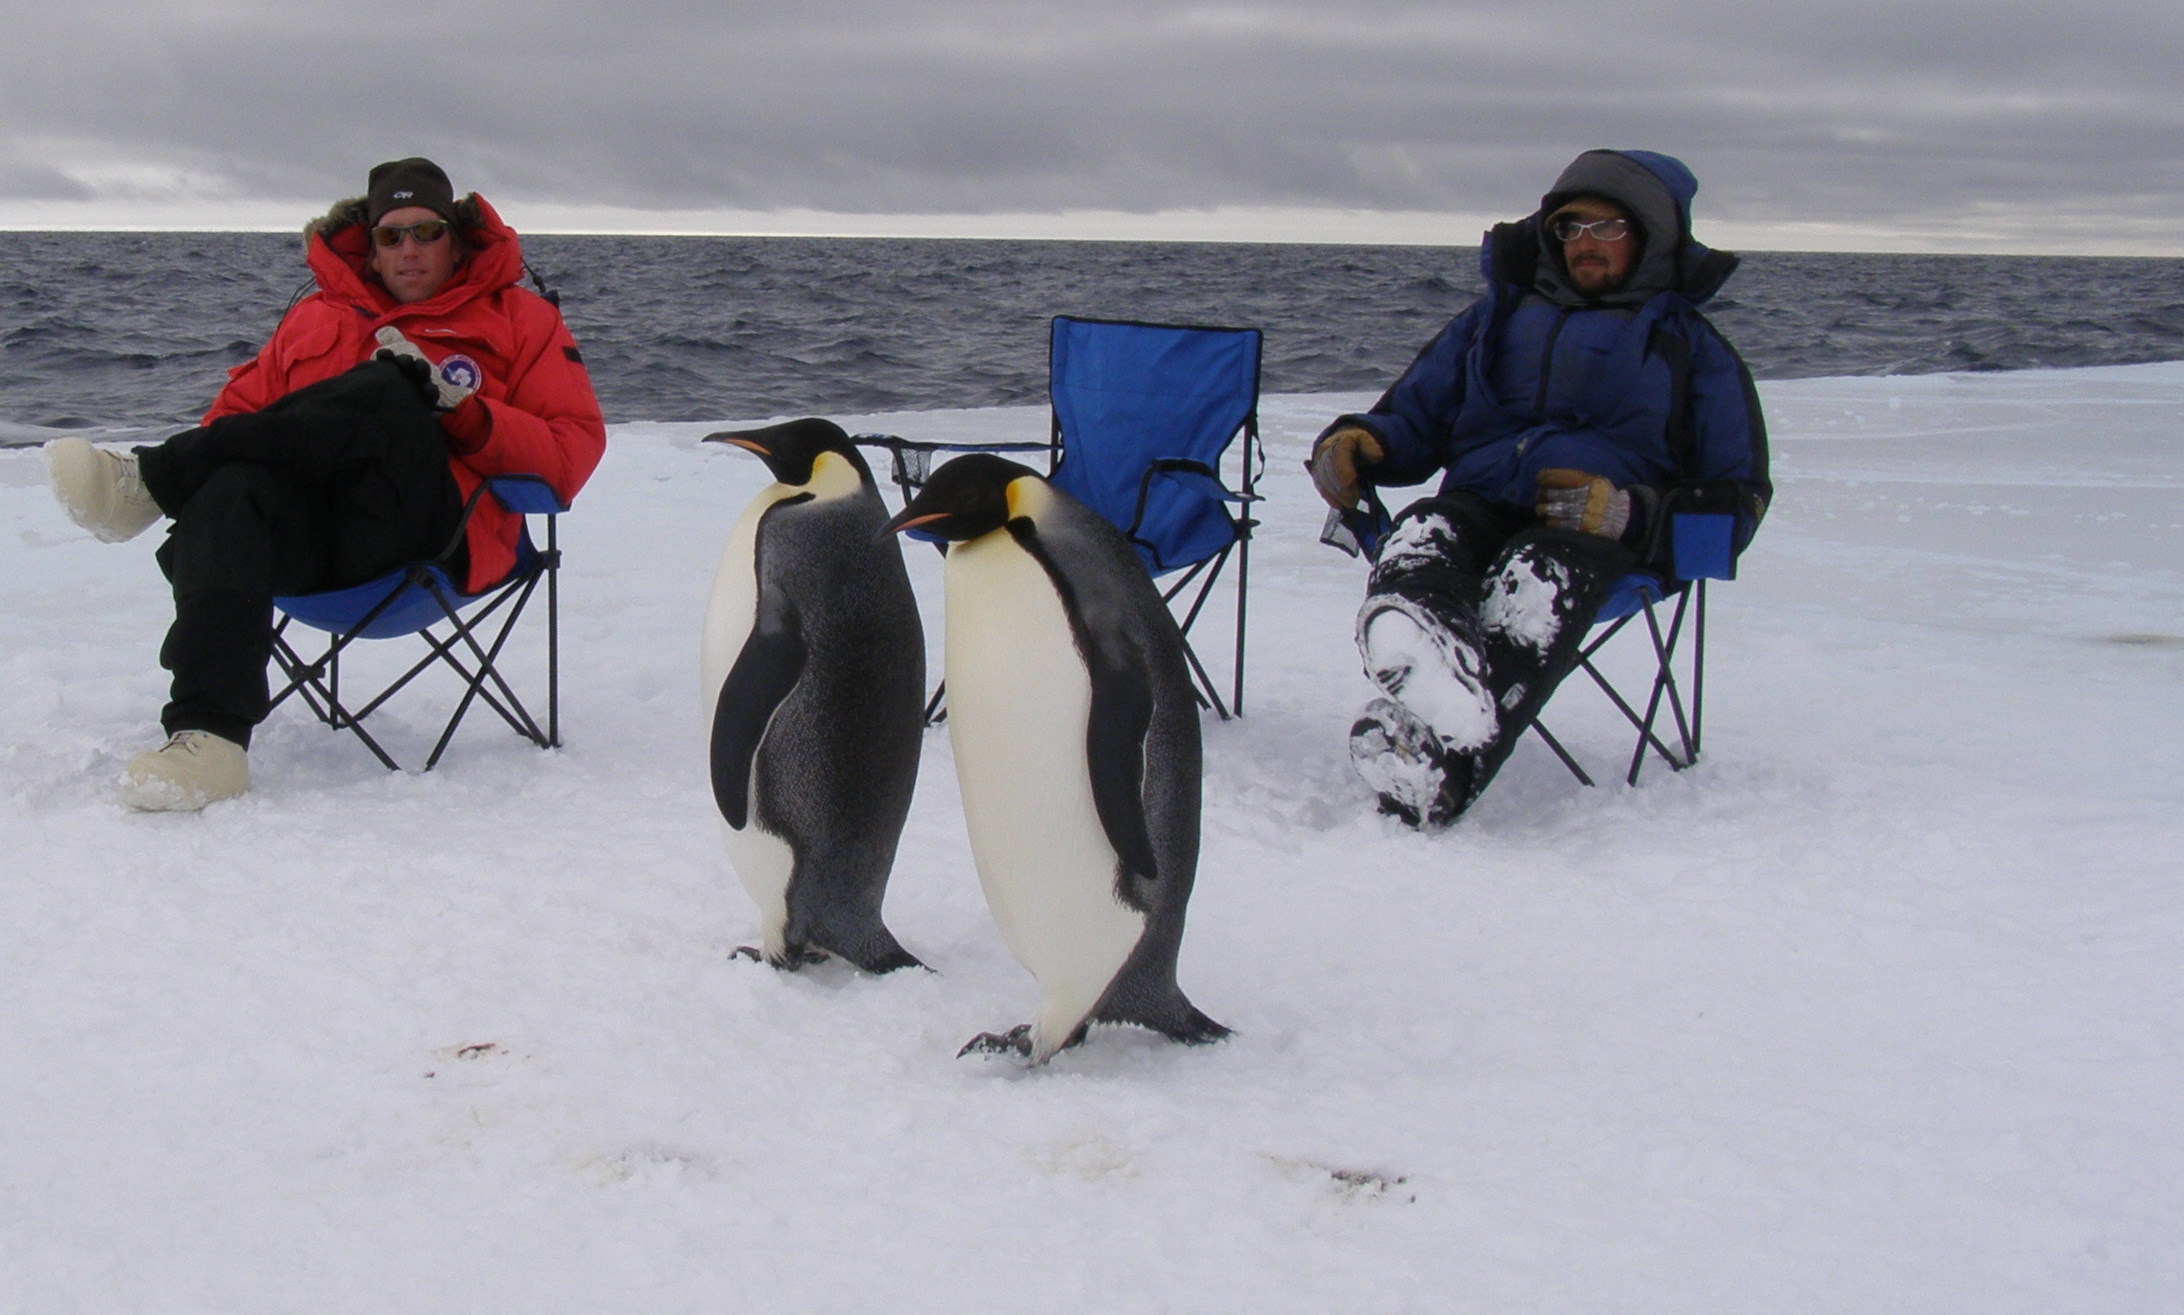 Beach chair moment: Jeff and Brian wait for our filters while penguins waddle and survey our work